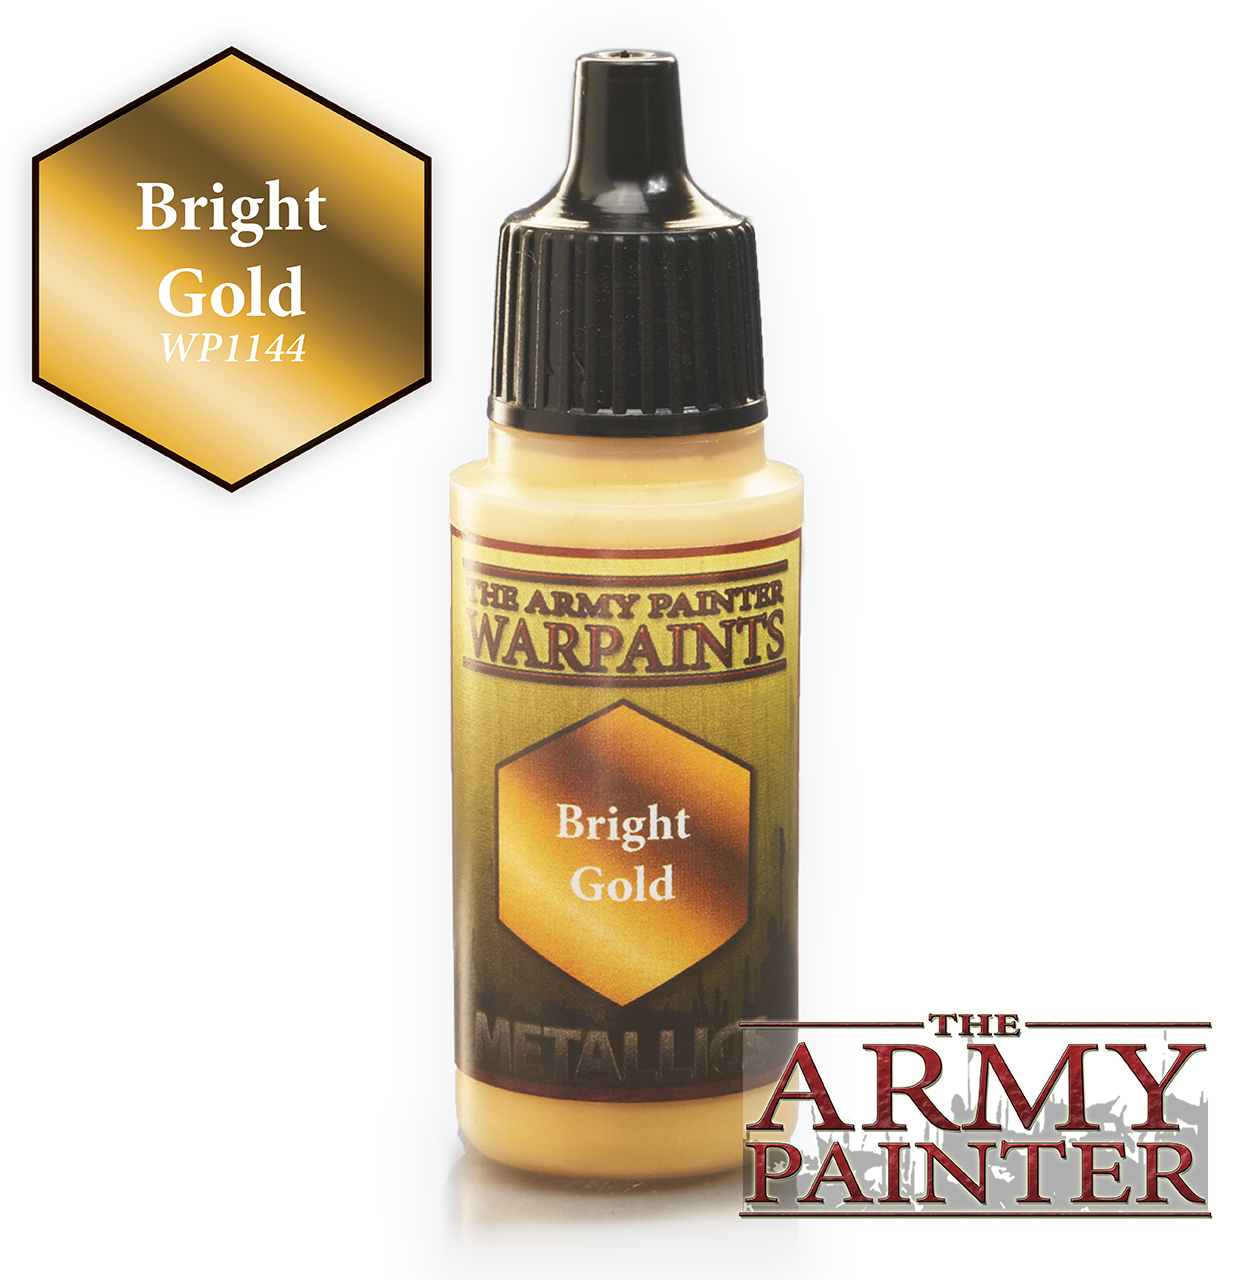 The ARMY PAINTER: Metallics Warpaints - Bright Gold | Tacoma Games